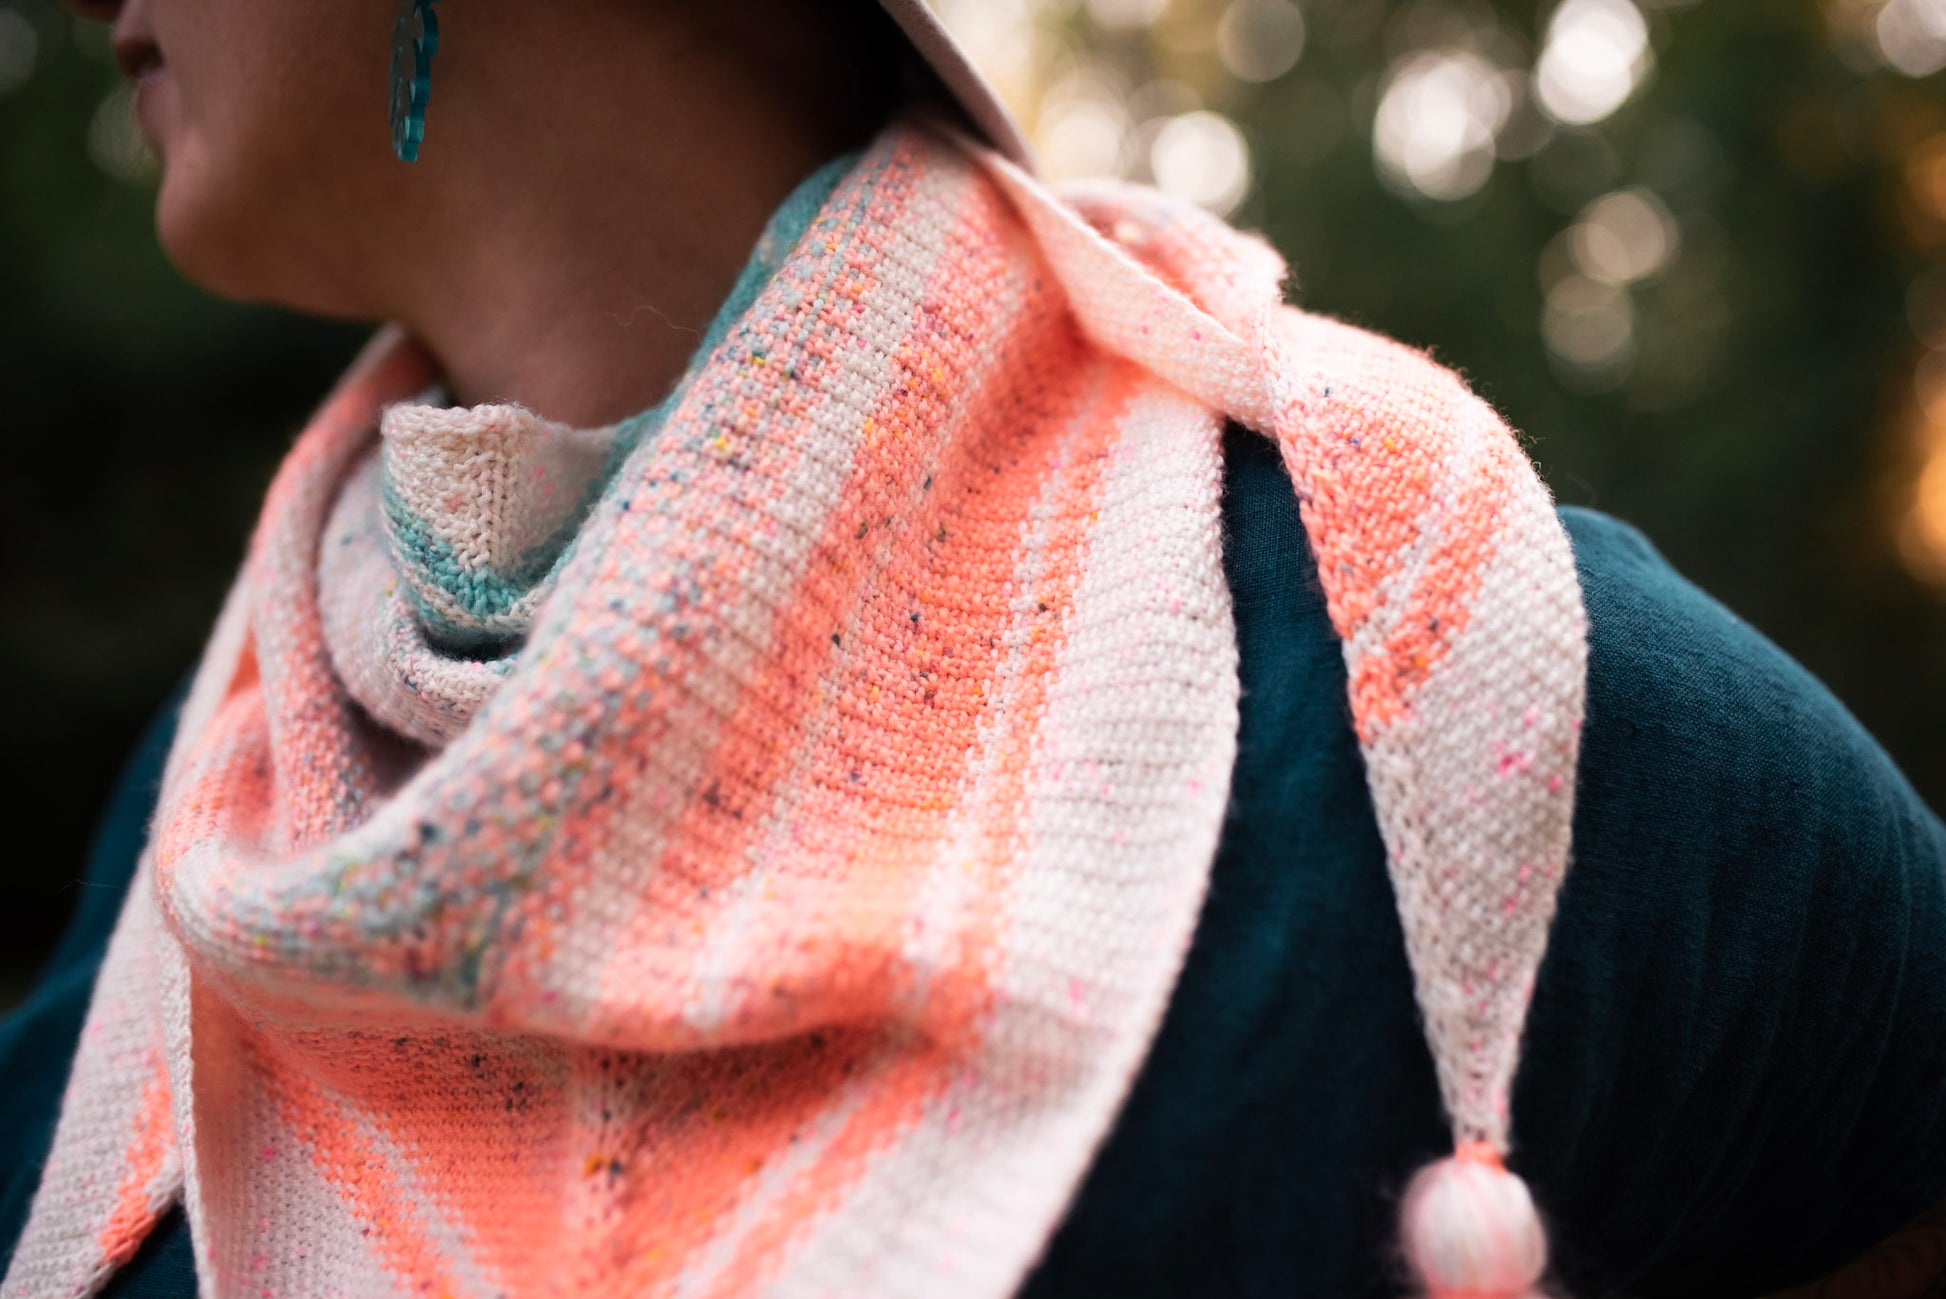 Seen up close, Jen wears a pastel shawl, knit with tassels at each end. The textured seed stitch pattern can be seen. 